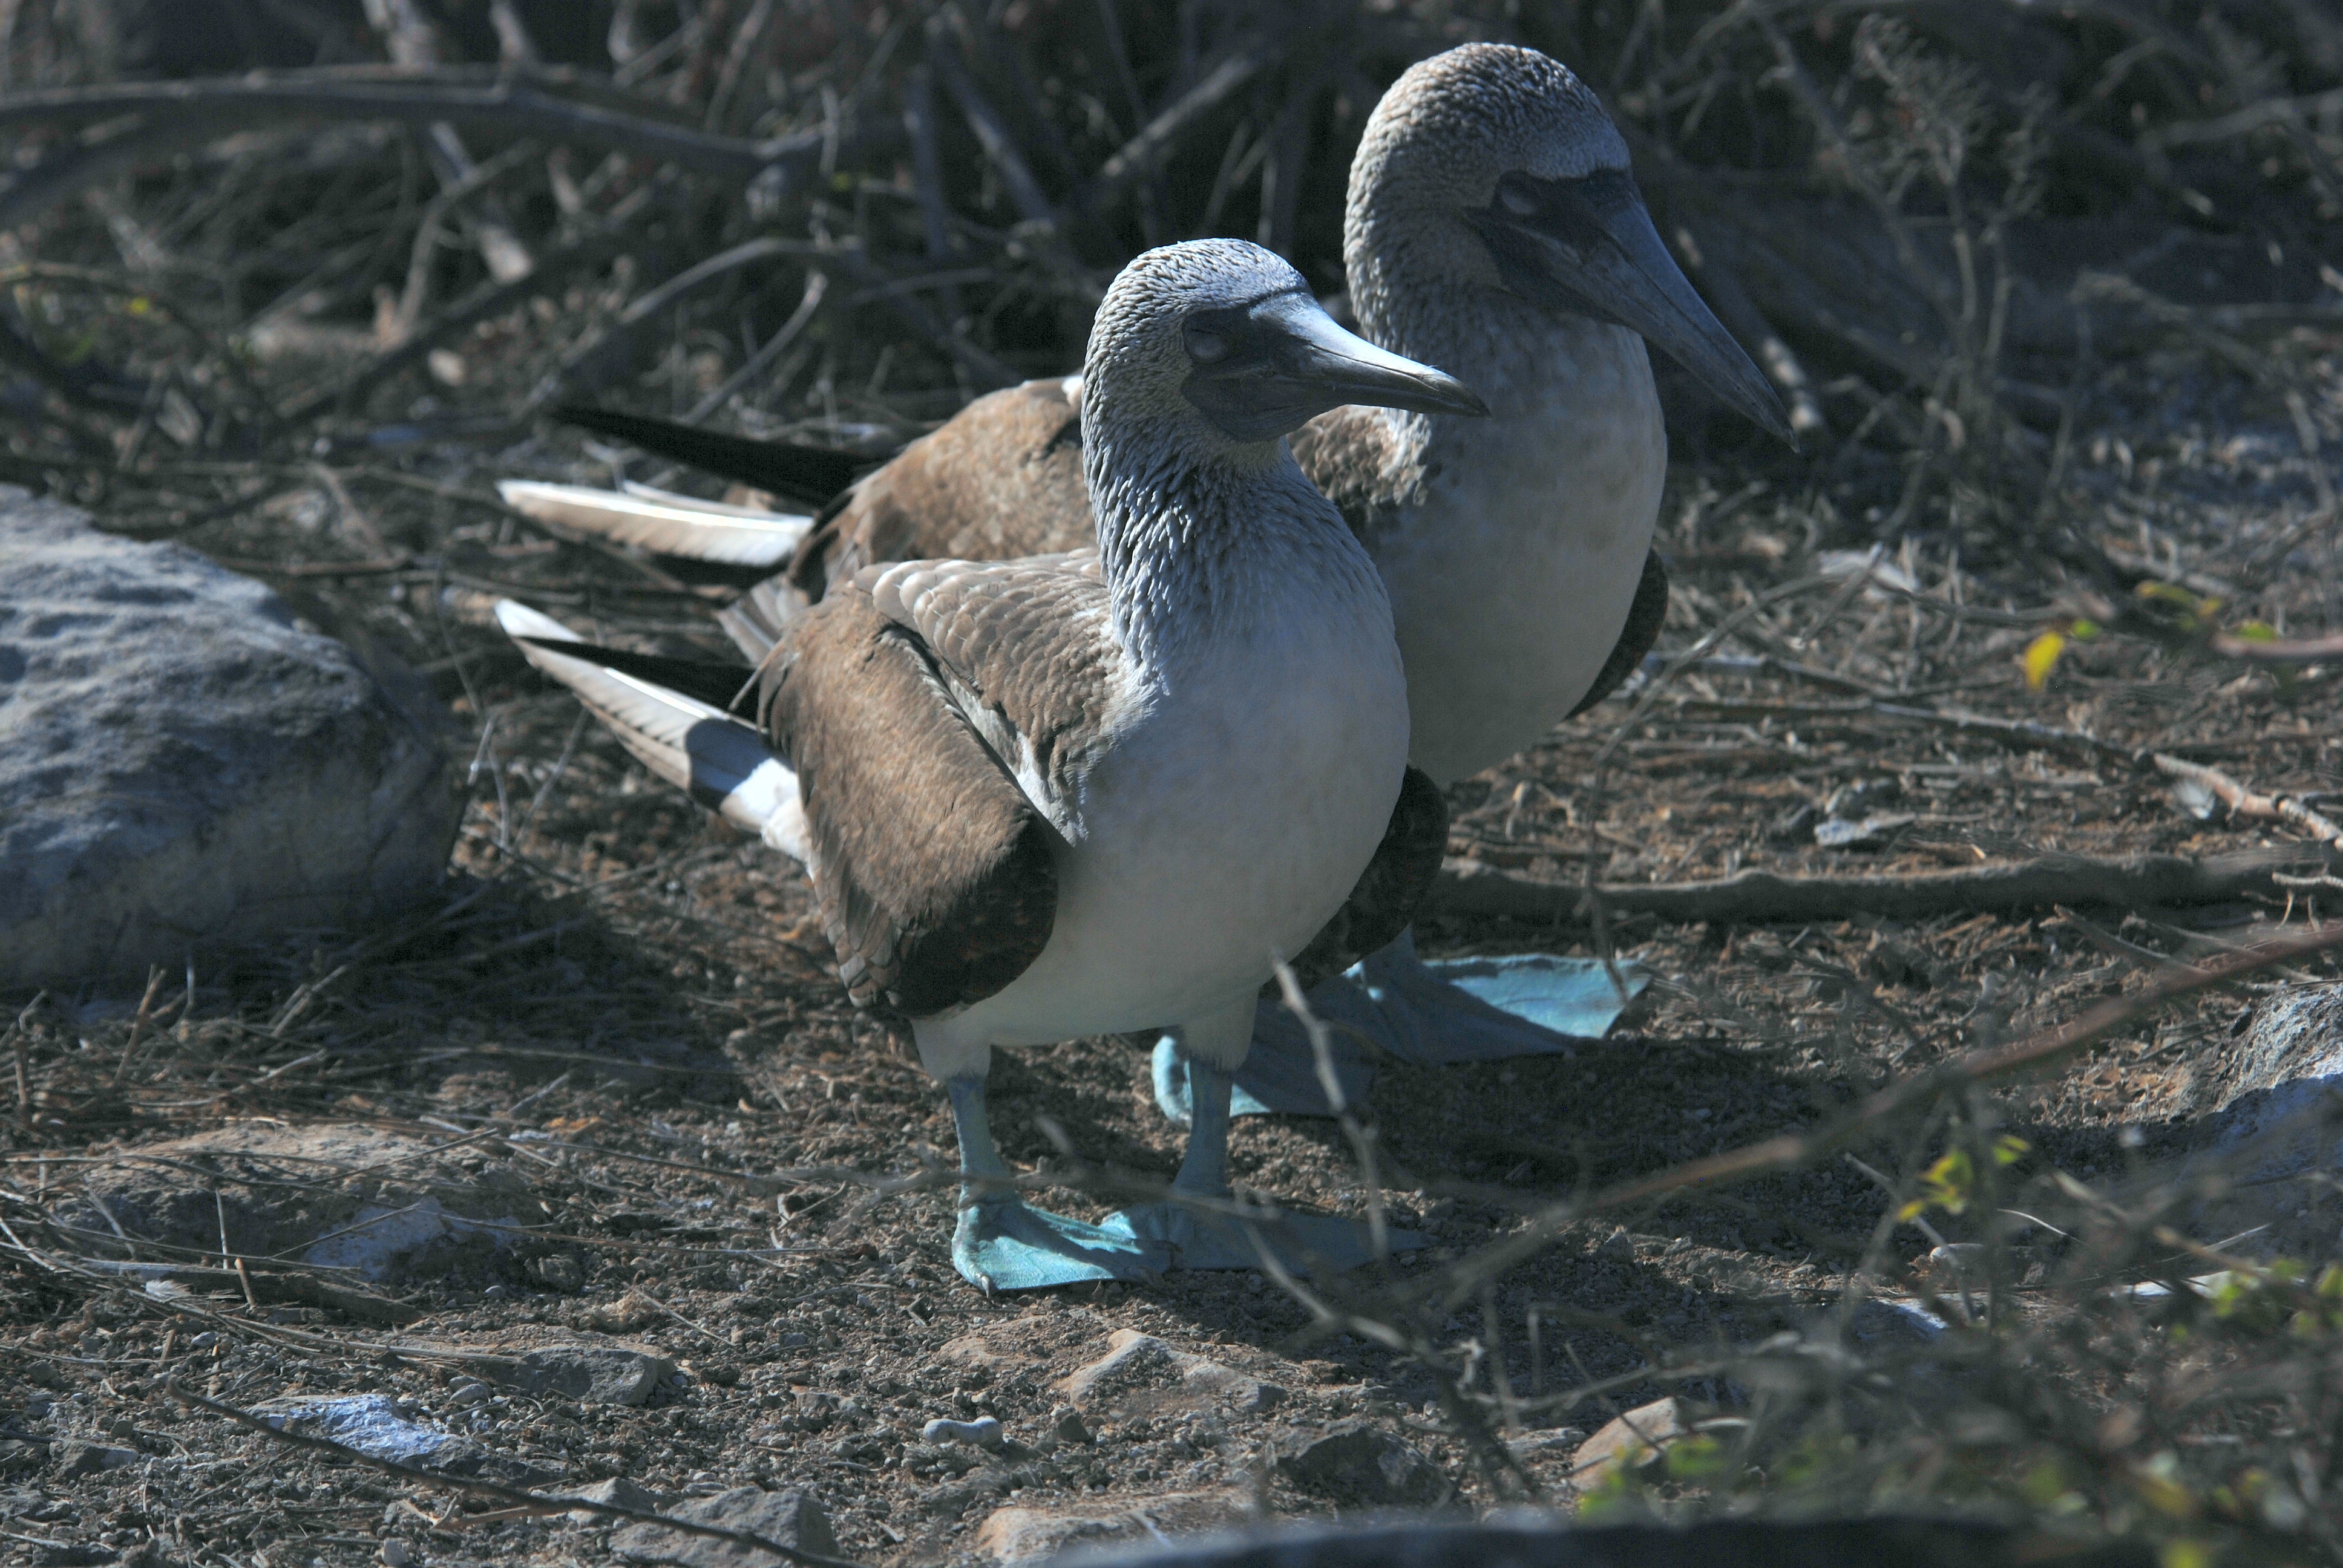 Click picture to see more Blue-footed Boobies.